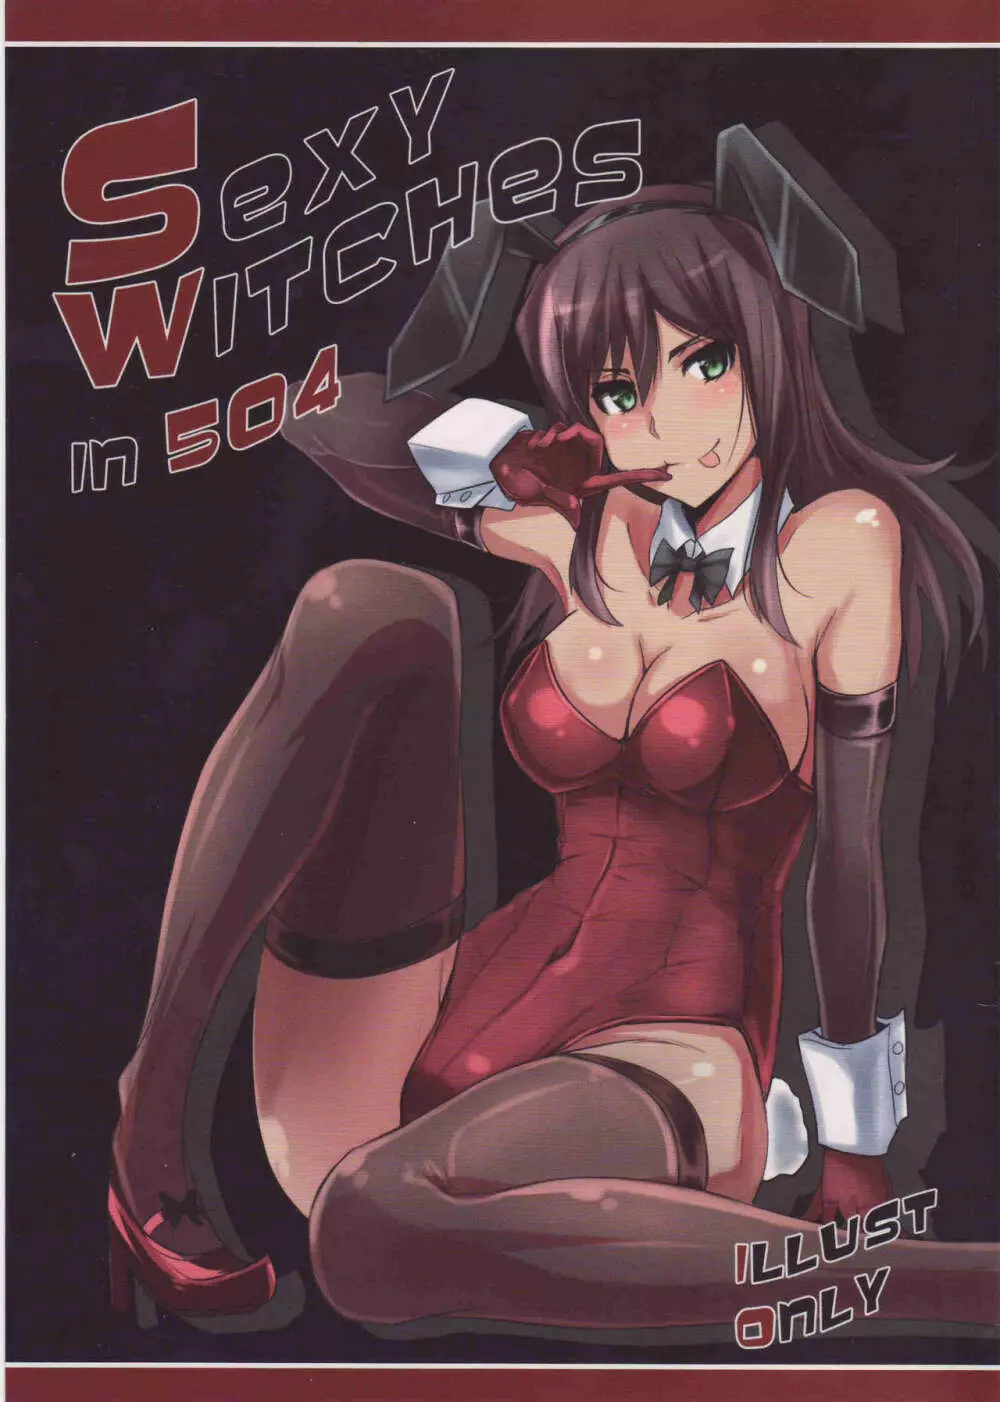 Sexy Witches in 504 Page.1